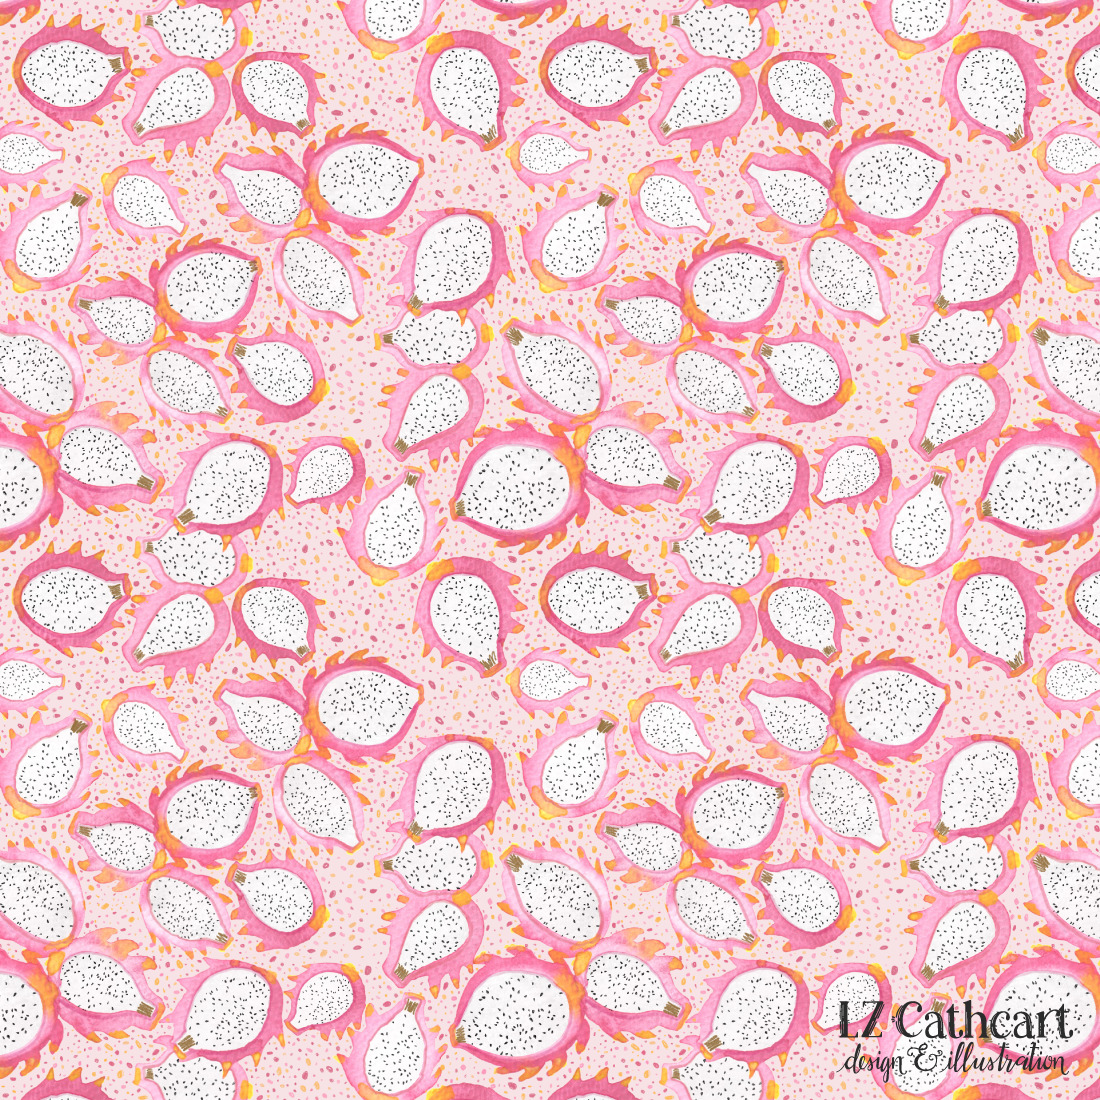 Surface Pattern Designs | LZ Cathcart